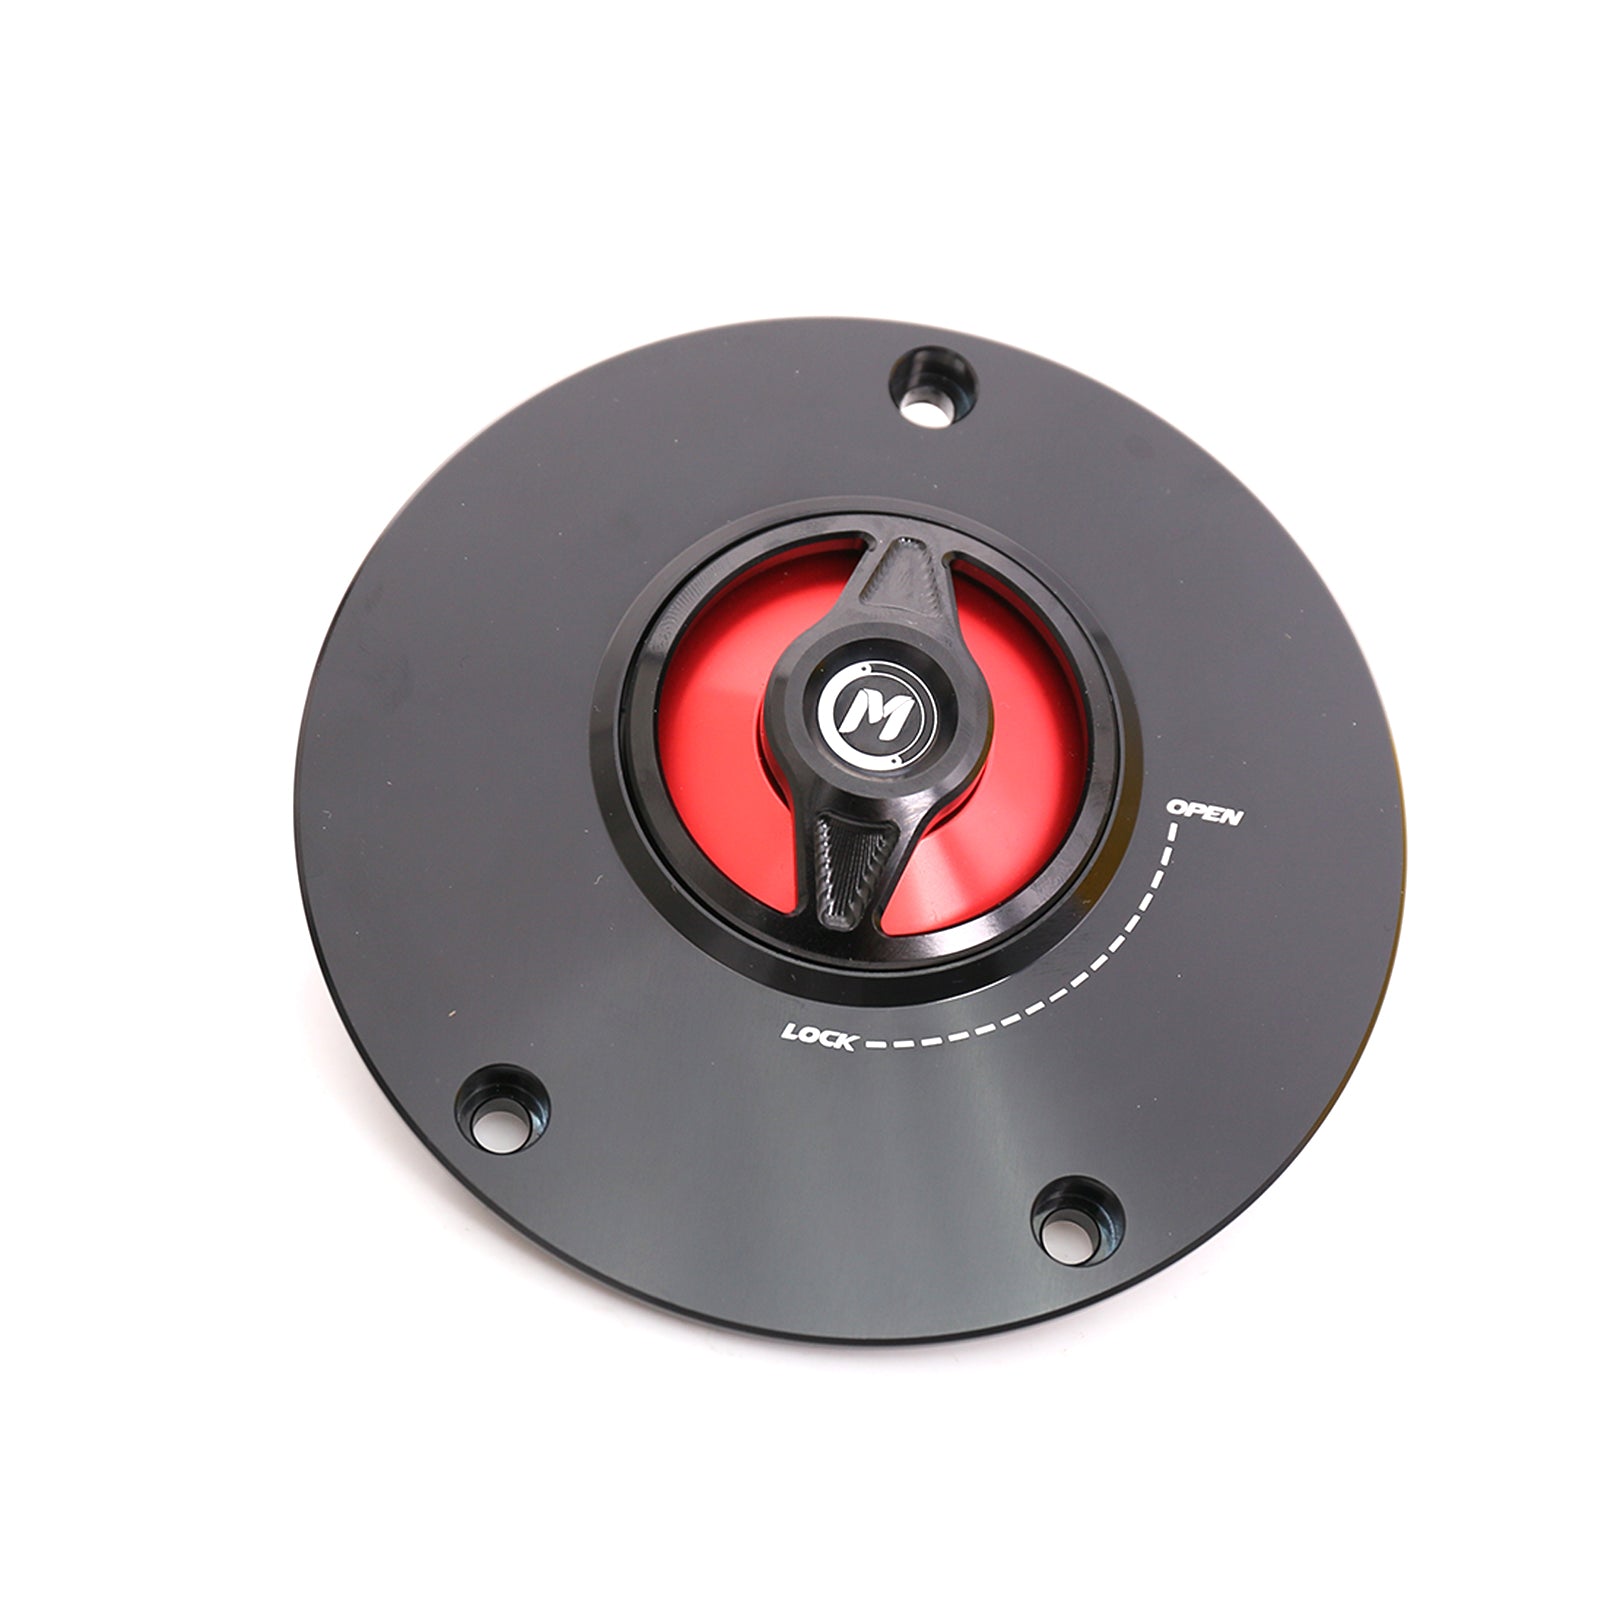 Red Quick Lock Release REVO fuel cap for mototorcycle